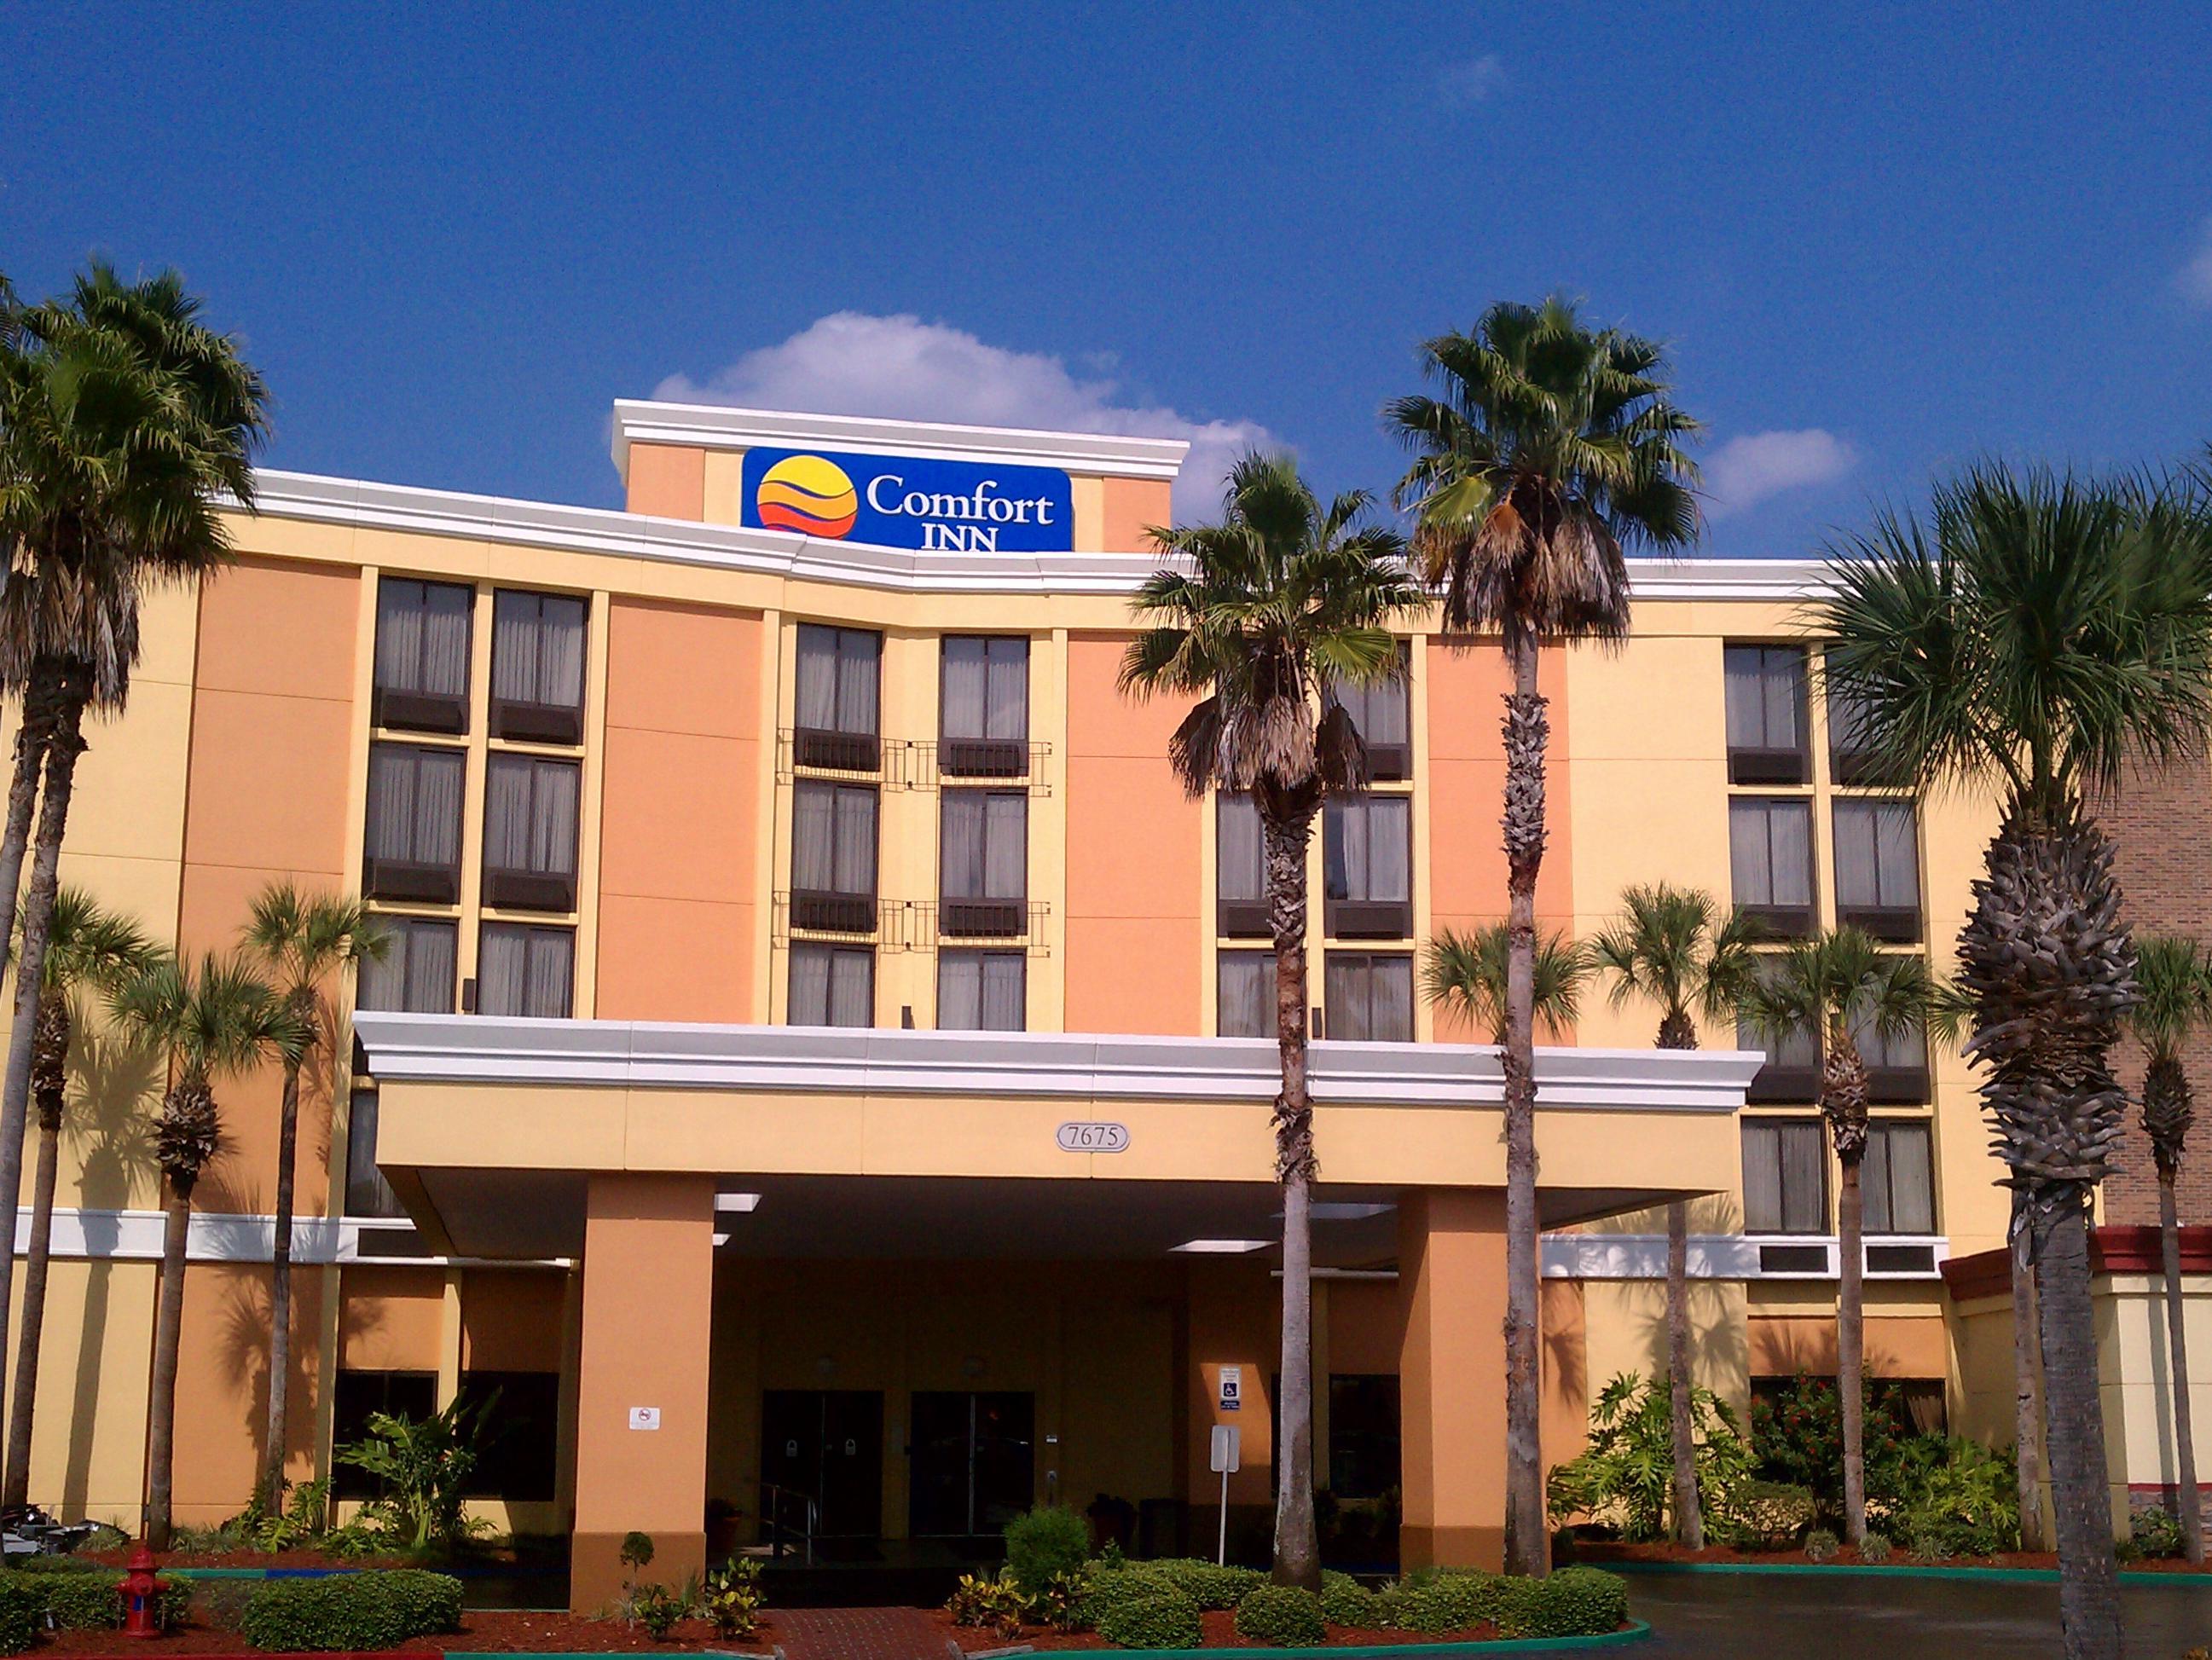 Comfort Inn Maingate Orlando FAQ 2017, What facilities are there in Comfort Inn Maingate Orlando 2017, What Languages Spoken are Supported in Comfort Inn Maingate Orlando 2017, Which payment cards are accepted in Comfort Inn Maingate Orlando , Orlando Comfort Inn Maingate room facilities and services Q&A 2017, Orlando Comfort Inn Maingate online booking services 2017, Orlando Comfort Inn Maingate address 2017, Orlando Comfort Inn Maingate telephone number 2017,Orlando Comfort Inn Maingate map 2017, Orlando Comfort Inn Maingate traffic guide 2017, how to go Orlando Comfort Inn Maingate, Orlando Comfort Inn Maingate booking online 2017, Orlando Comfort Inn Maingate room types 2017.